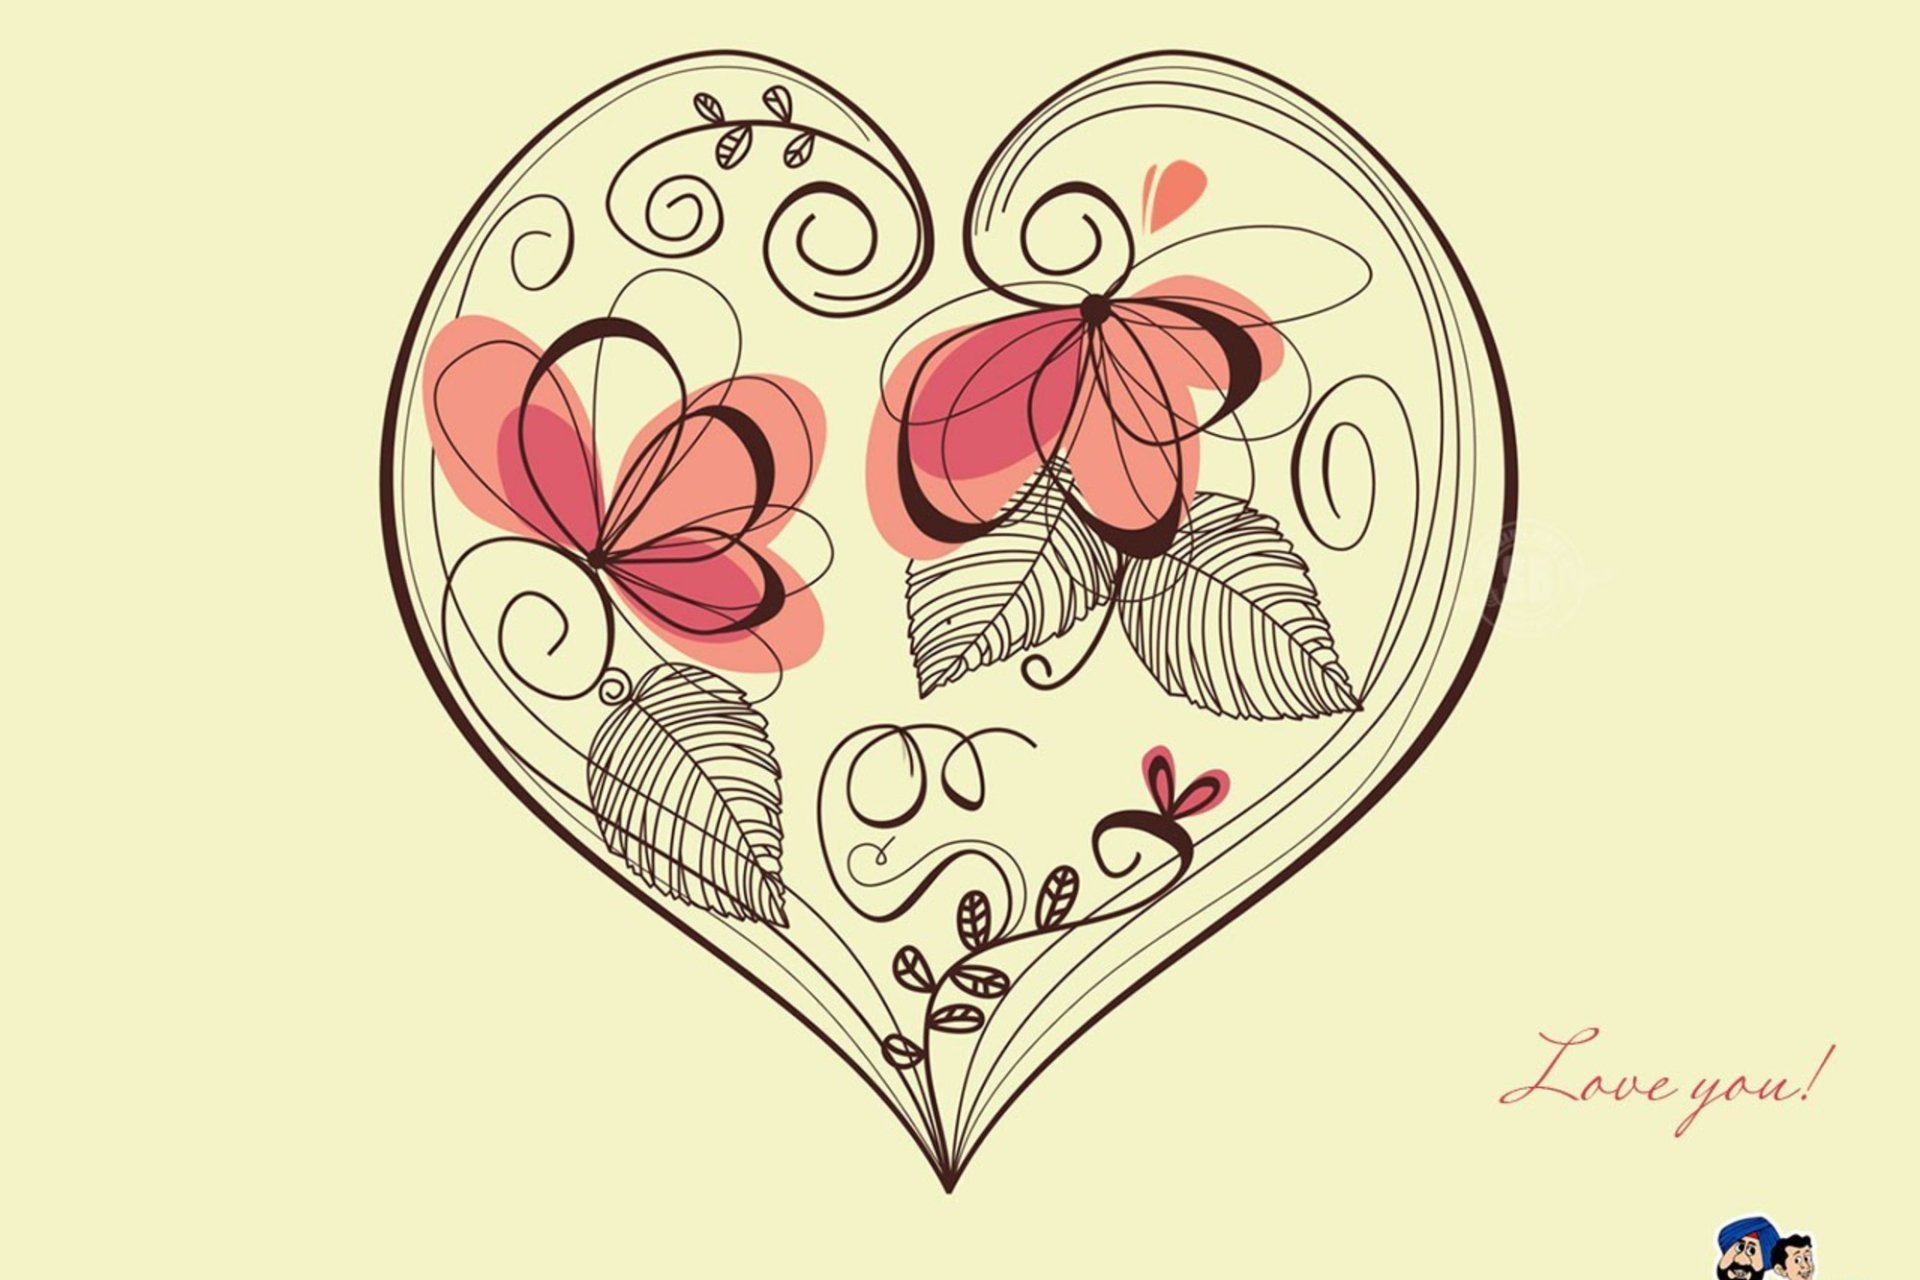 Heart Drawing Image - ID: 359322 - Image Abyss